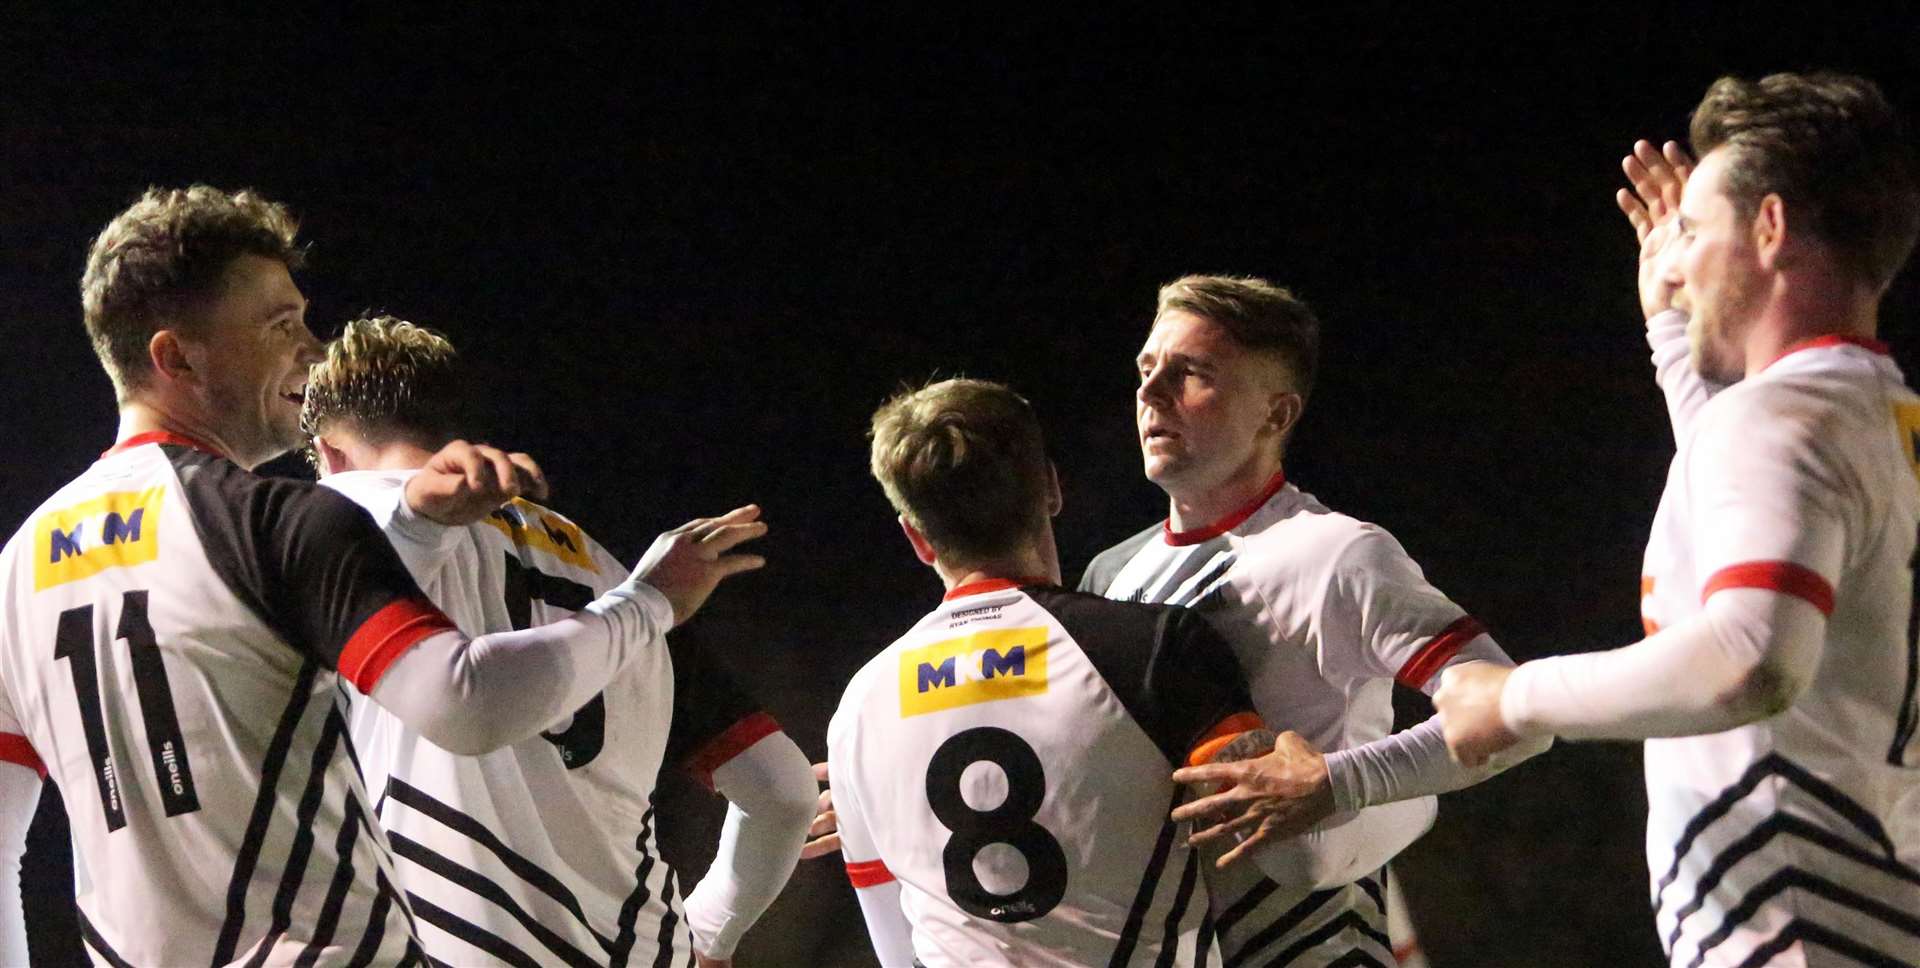 Rory Smith celebrates his 74th-minute goal for Deal against Fisher with his team-mates. Picture: Paul Willmott